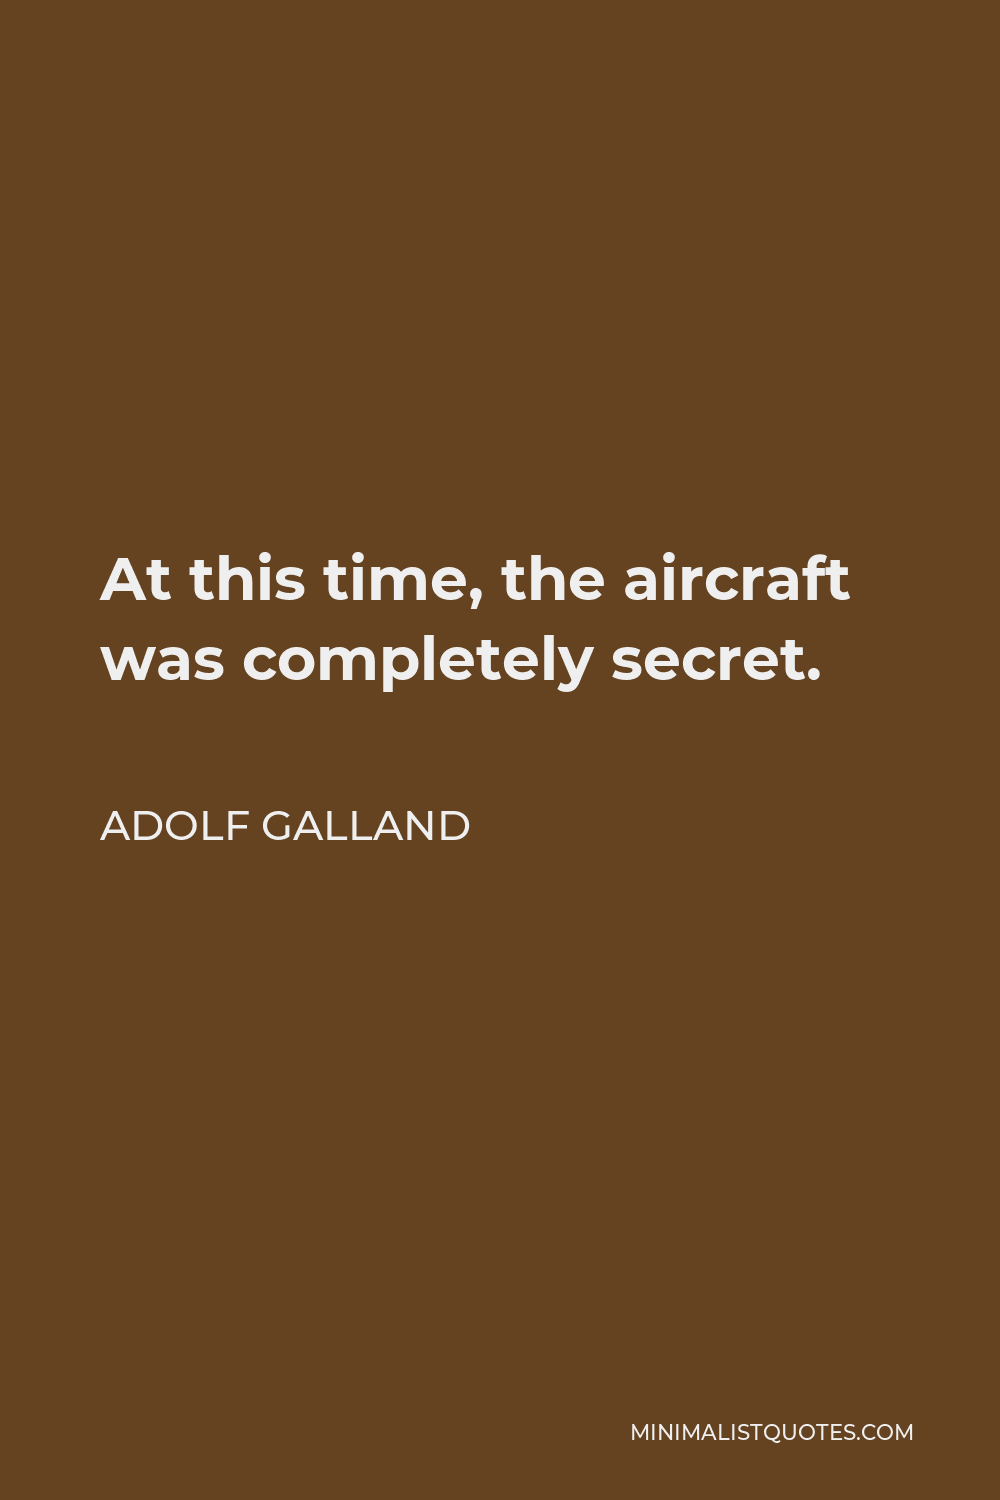 Adolf Galland Quote - At this time, the aircraft was completely secret.